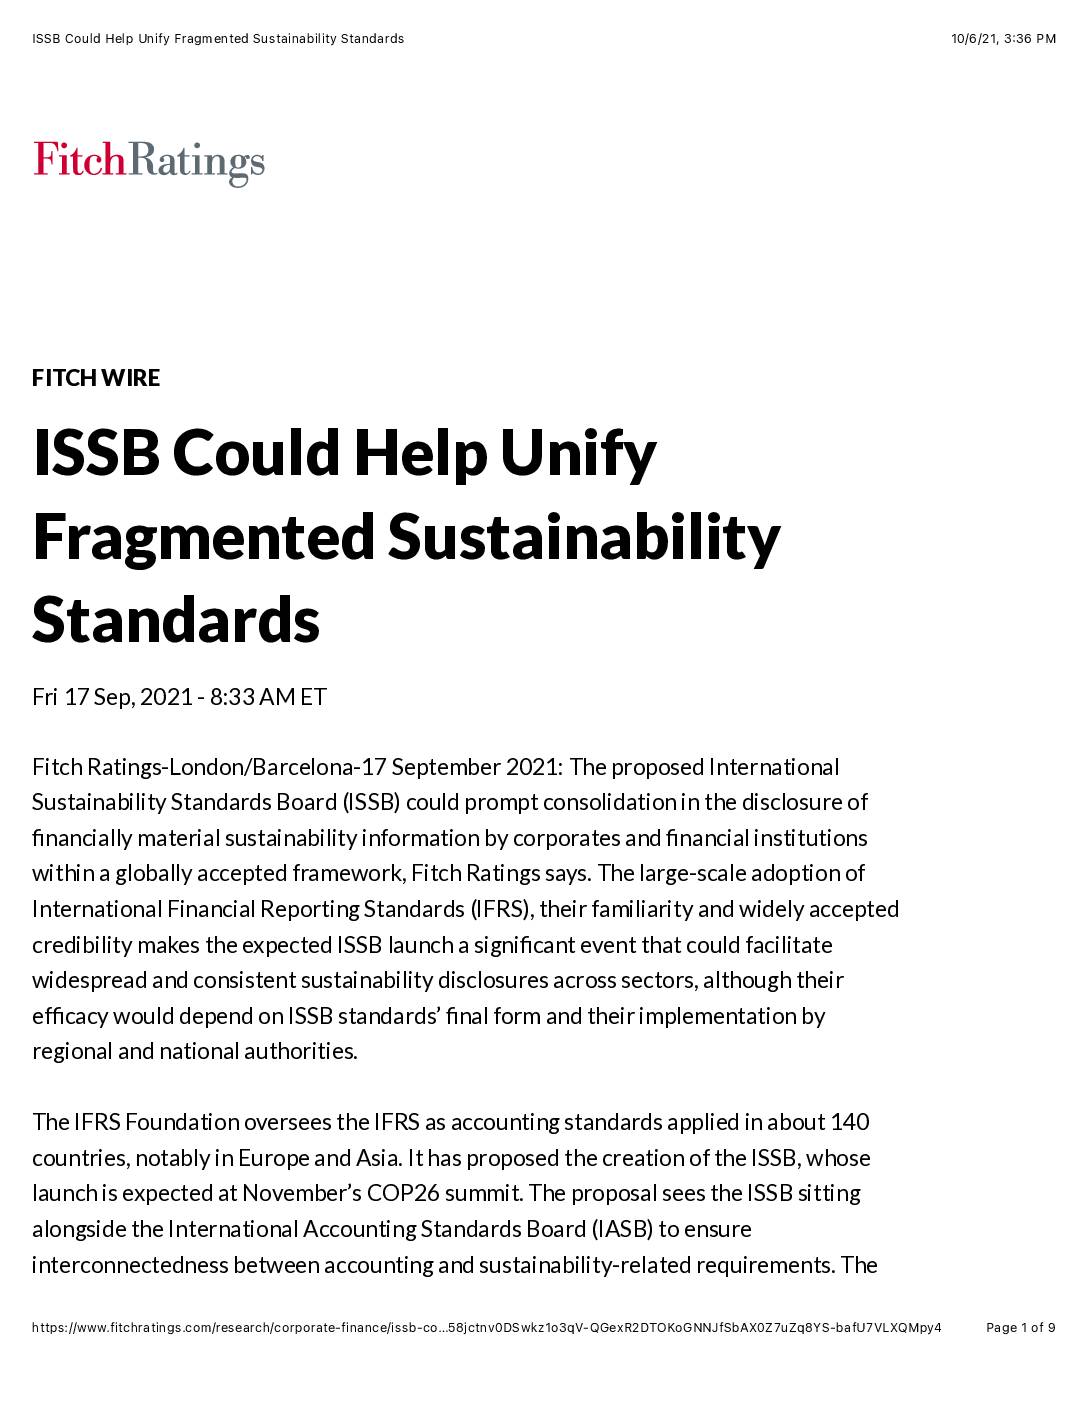 International Sustainability Standards Board (‘ISSB’) Could Help Unify Fragmented Sustainability Standards